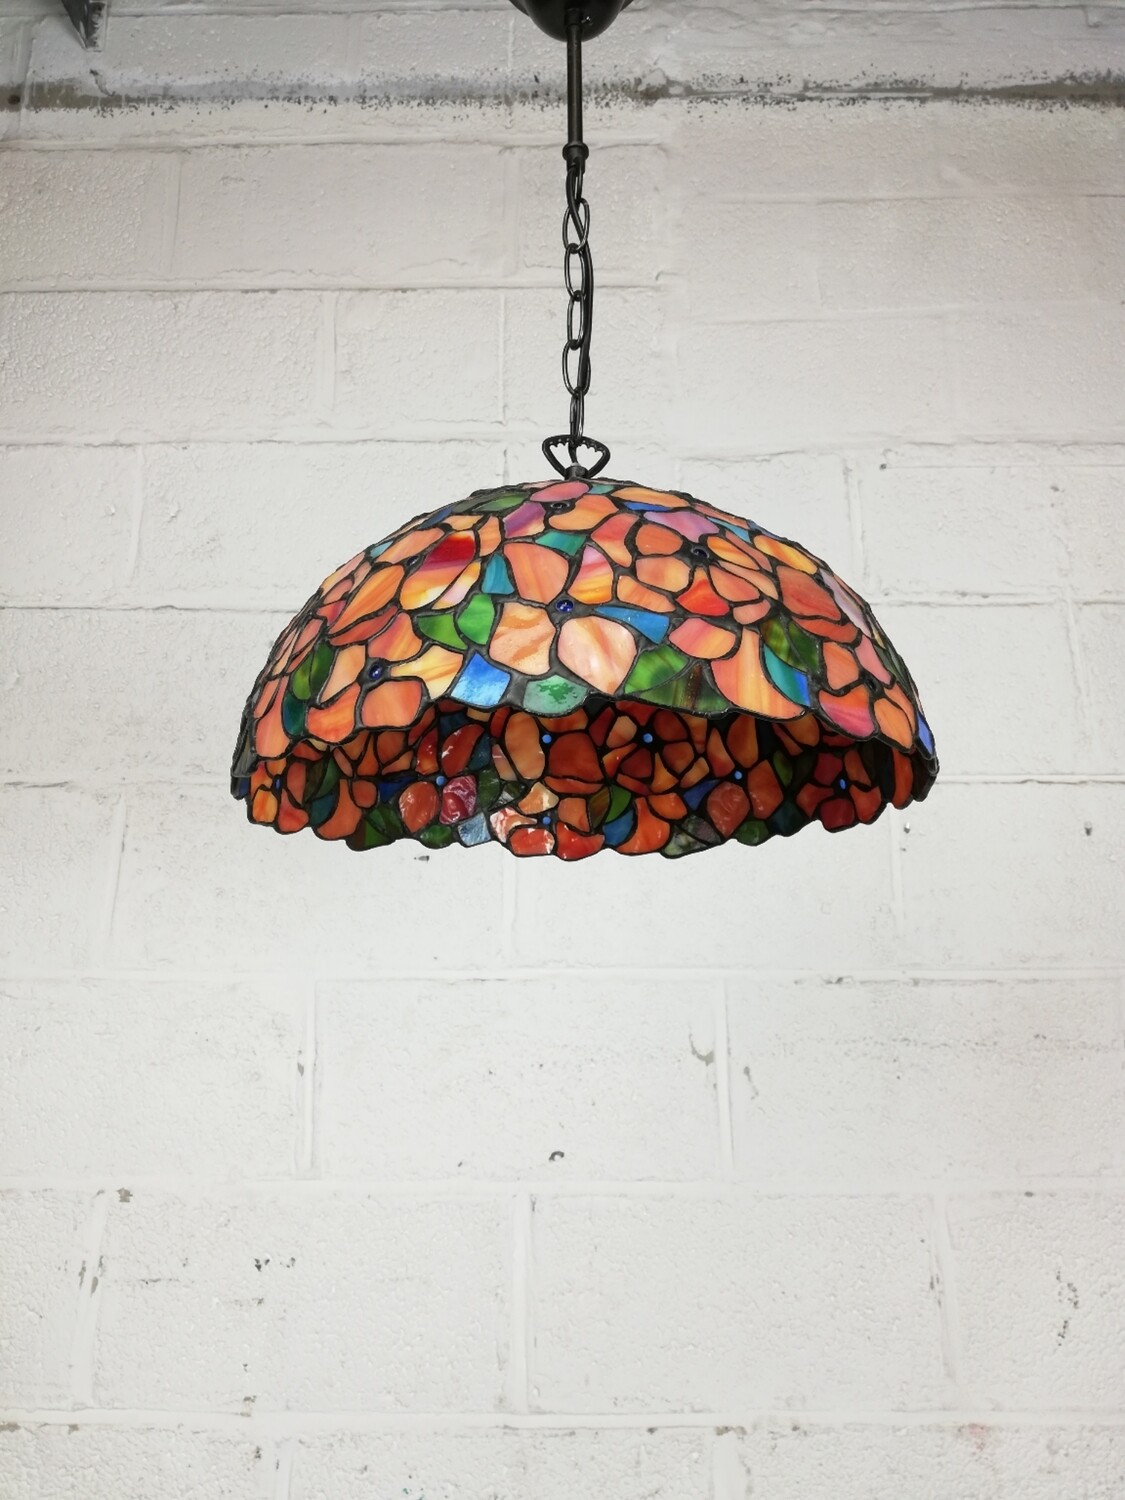 Colorful Tiffany lamp with flowers